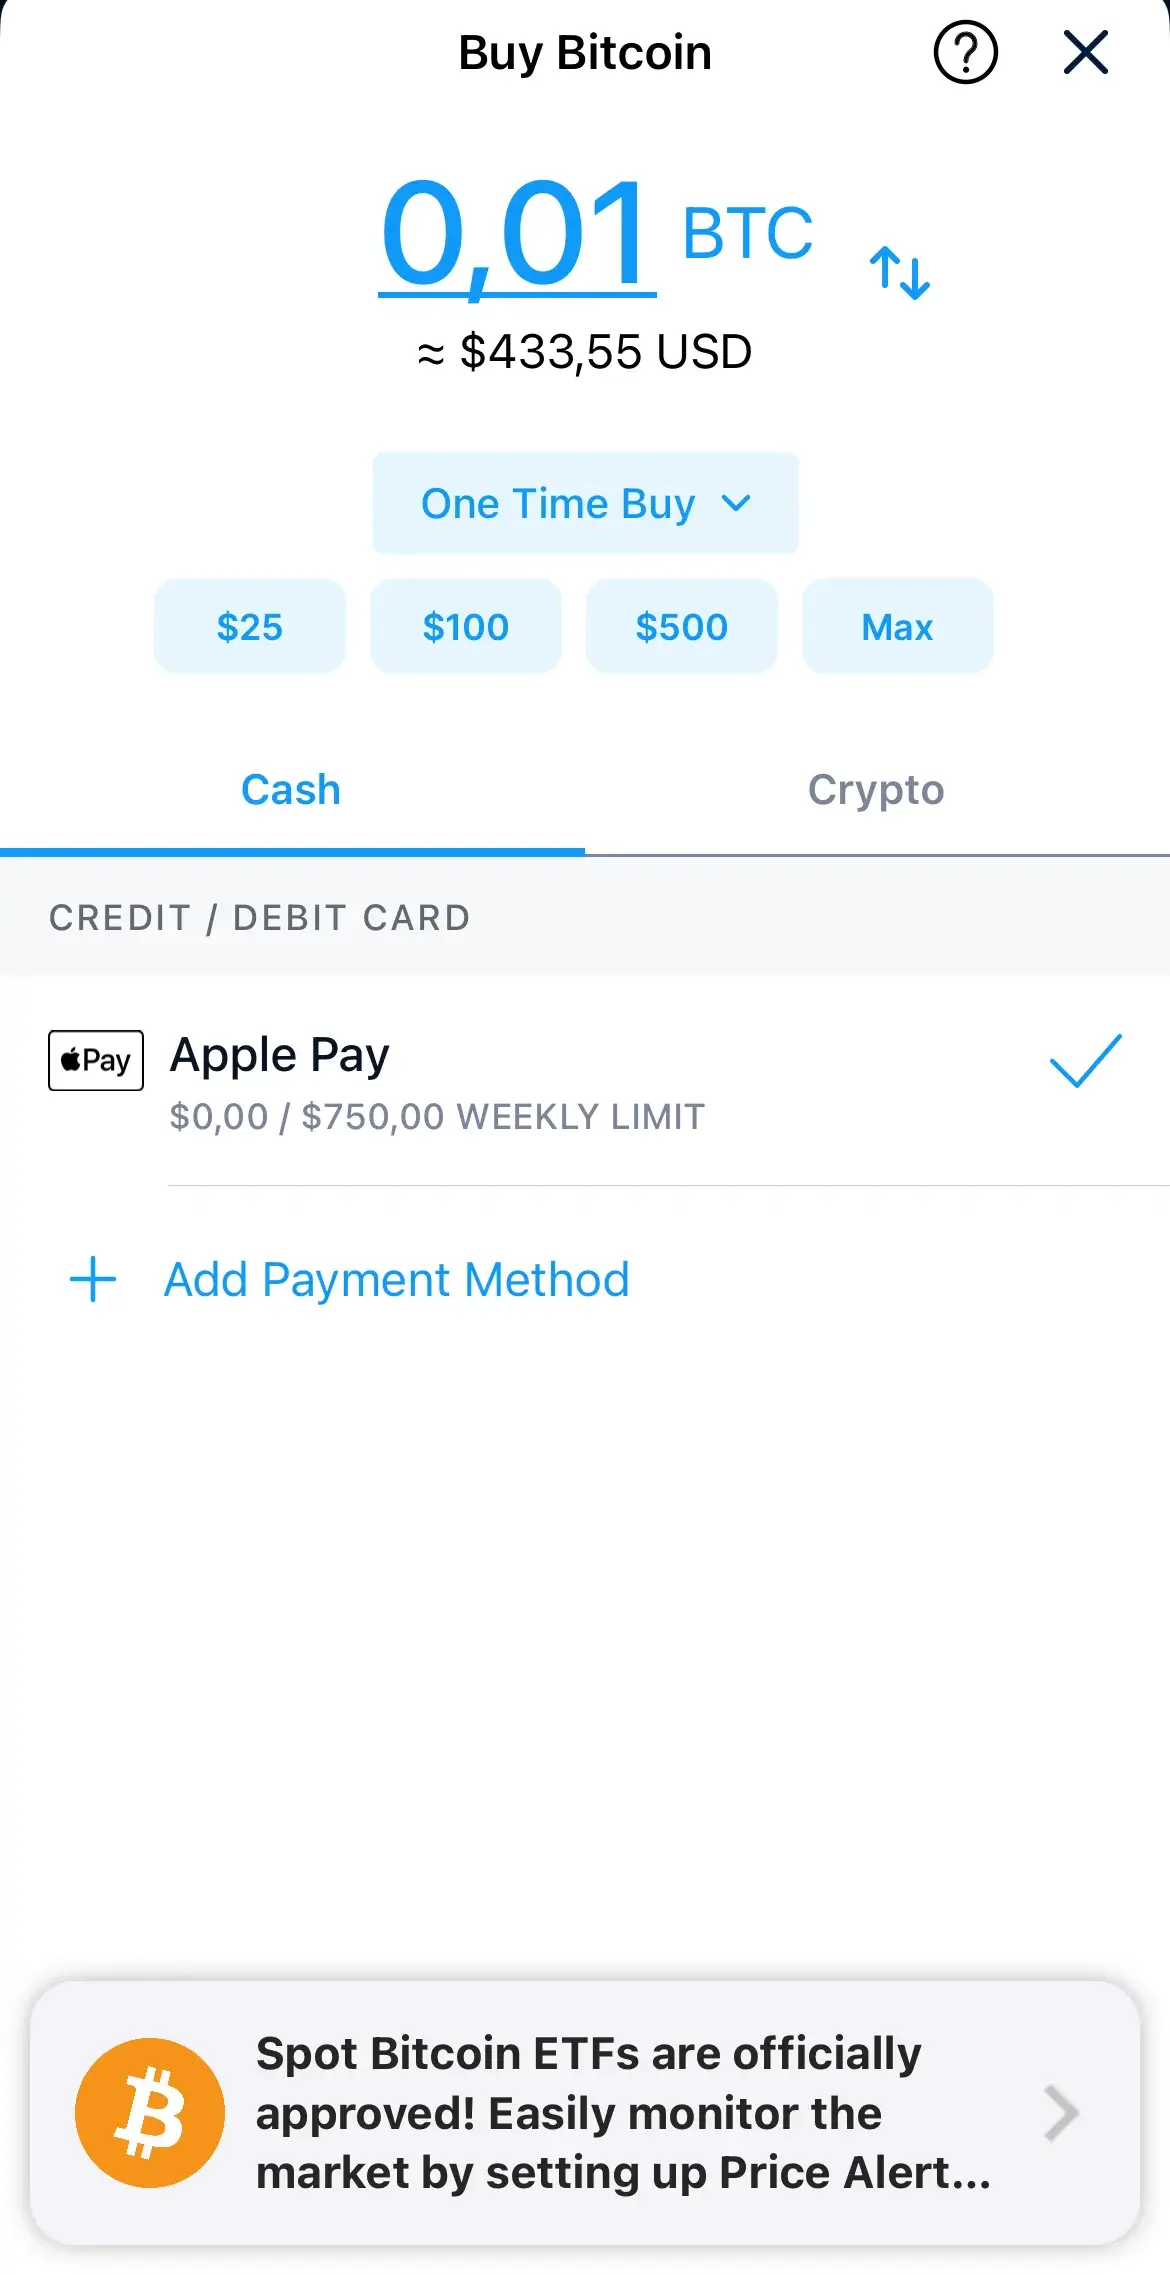 Step 3: Select the payment method and confirm the transaction